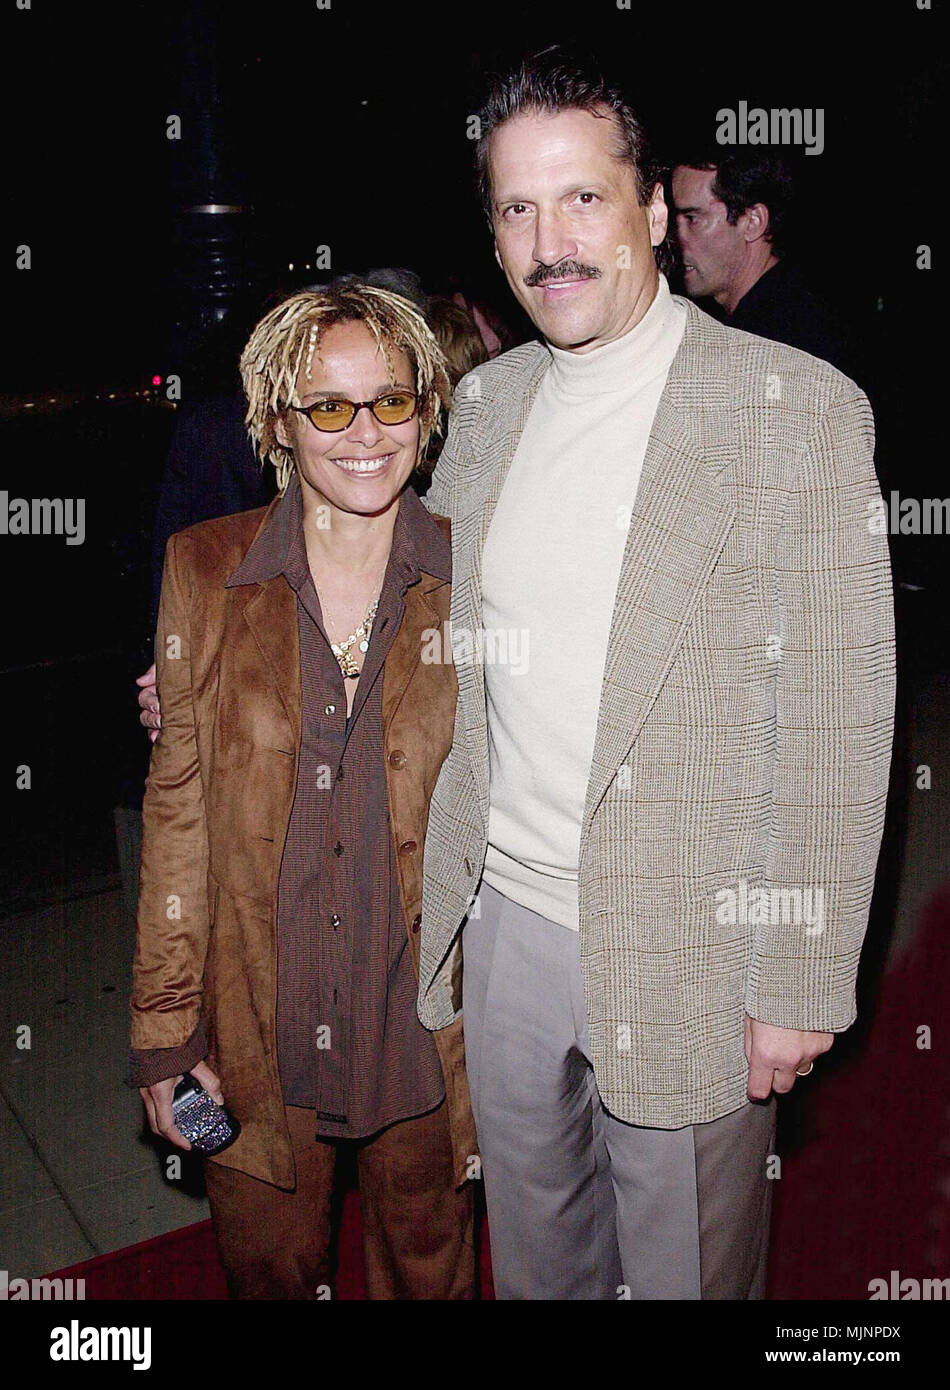 12 Oct 2000, Los Angeles, California, USA --- Original caption: Pay It Forward Premiere was held at the Academy of Motion Picture in Los Angeles. --- ' Tsuni / Bourquard 'Shari Belafonte with Husband Shari Belafonte with Husband Shari Belafonte with Husband Event in Hollywood Life - California,  Red Carpet Event, Vertical, USA, Film Industry, Celebrities,  Photography, Bestof, Arts Culture and Entertainment, Topix  Celebrities fashion /  from the Red Carpet-1994-2000, one person, Vertical, Best of, Hollywood Life, Event in Hollywood Life - California,  Red Carpet and backstage, USA, Film Indus Stock Photo